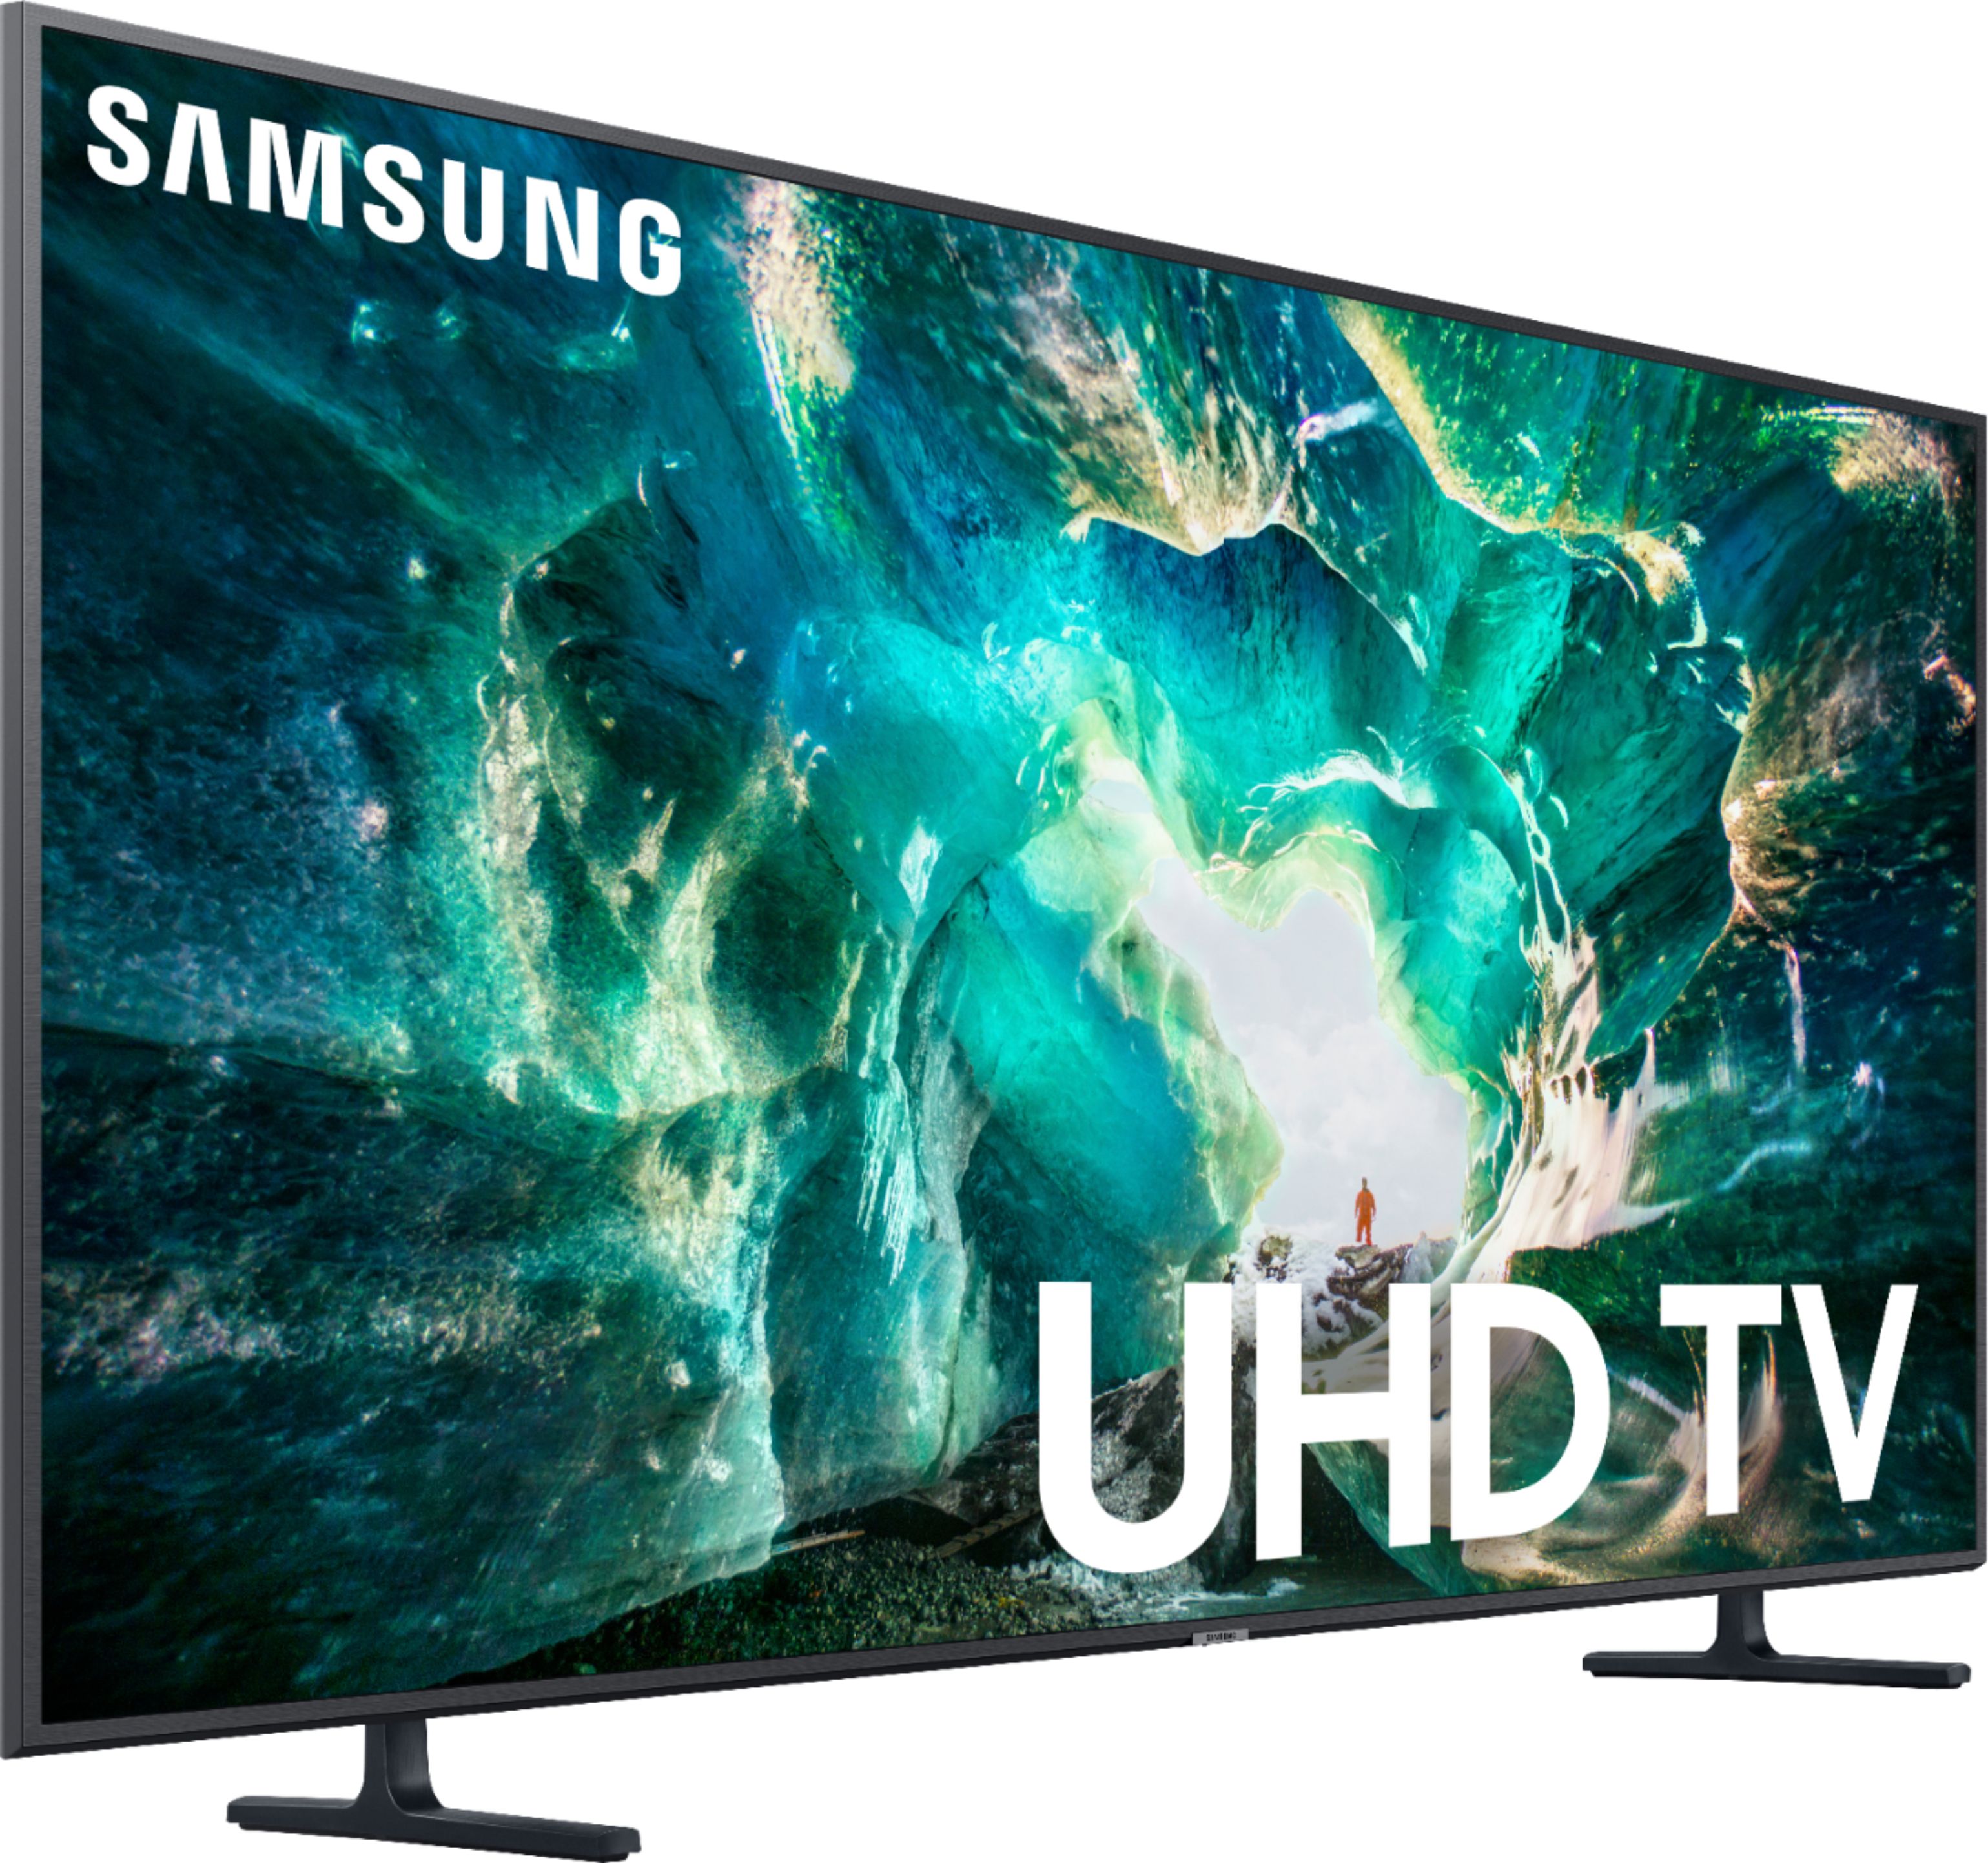 Best Buy Samsung 55" Class 8 Series 4K UHD TV Smart LED with HDR